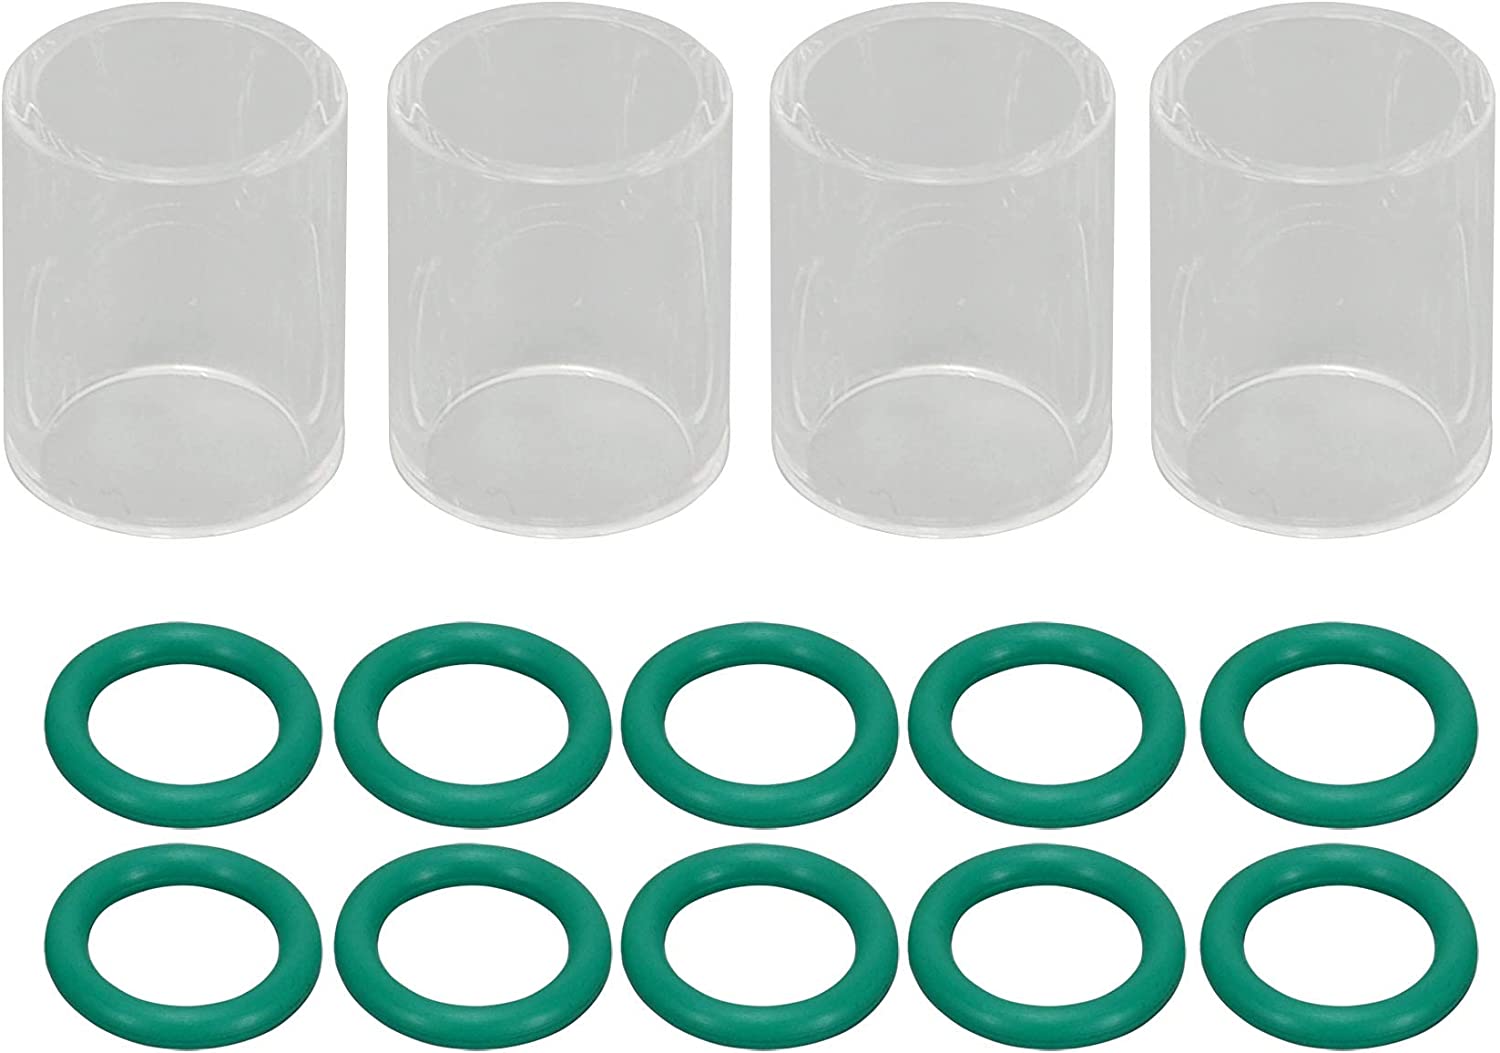 Insulated Glass Cup #10 (5/8" & 16.0mm Orifice) Temperature Resistant O-rings For SR WP 9 17 18 20 25 26 TIG welding torch 14pcs